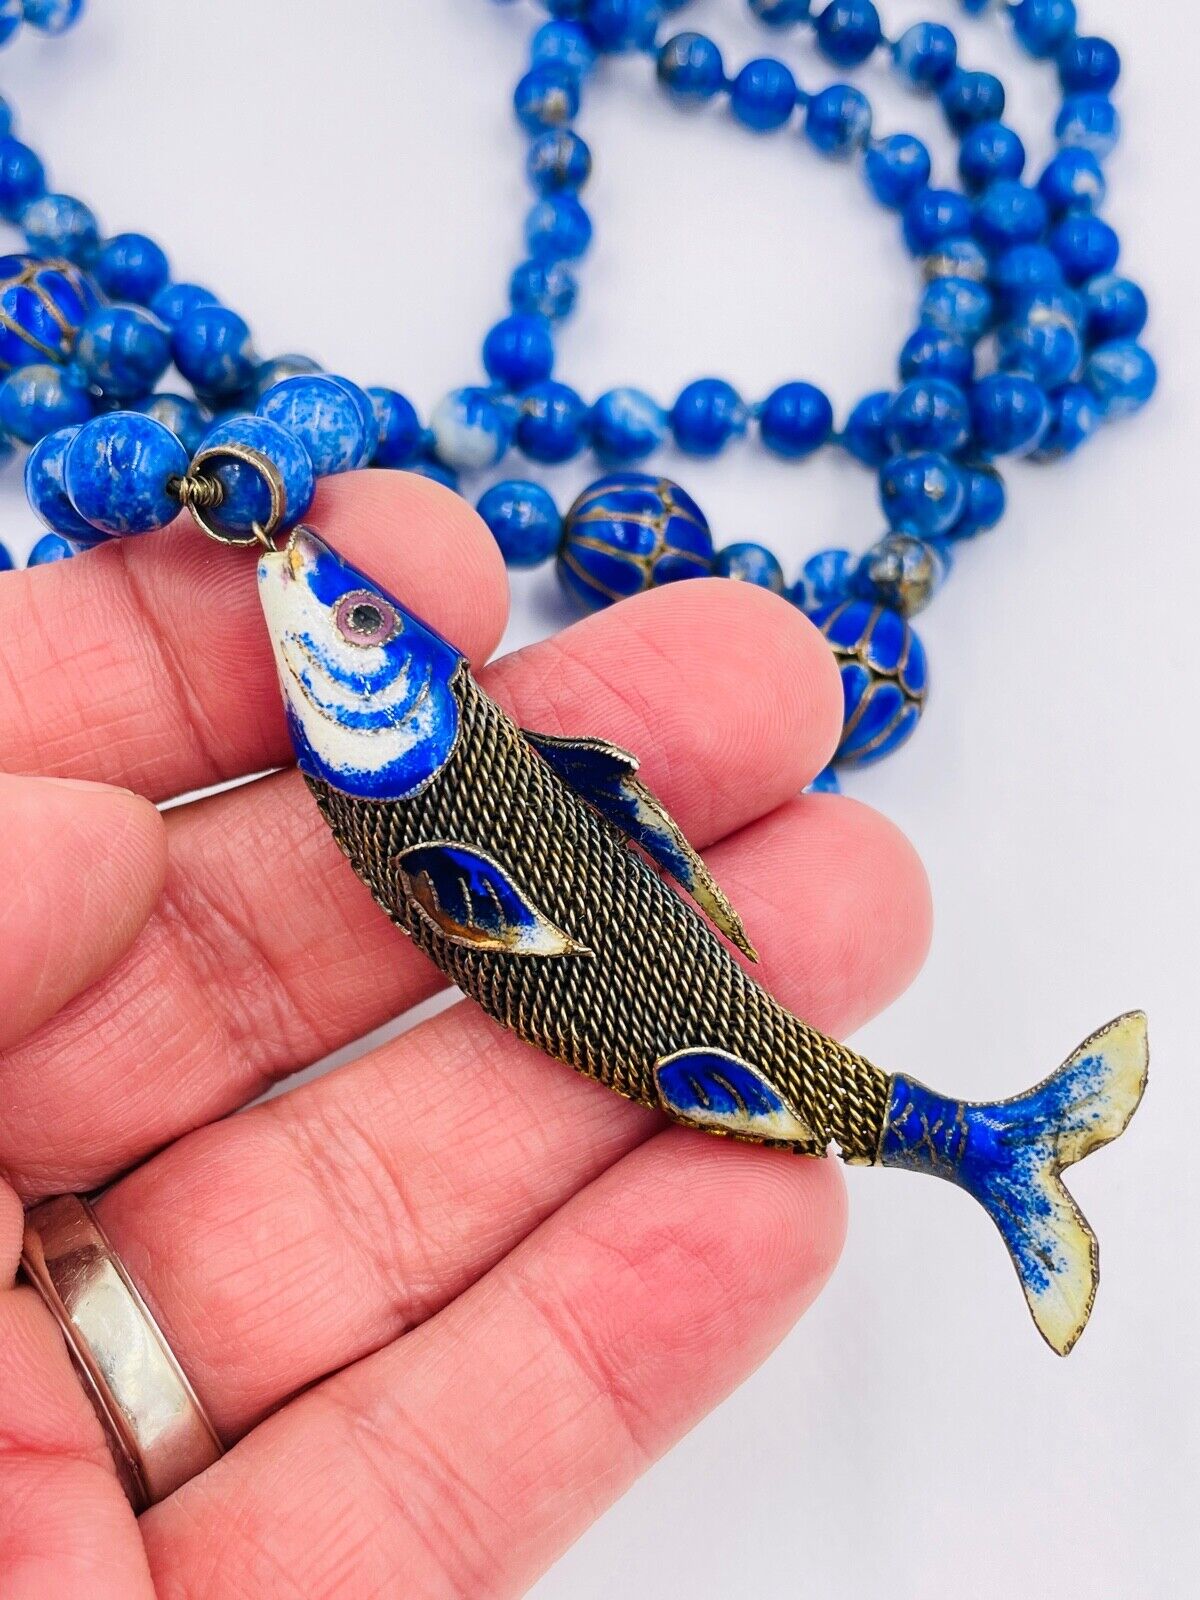 Vintage Antique Chinese Sterling Silver Enamel Articulated Fish Pendant Necklace